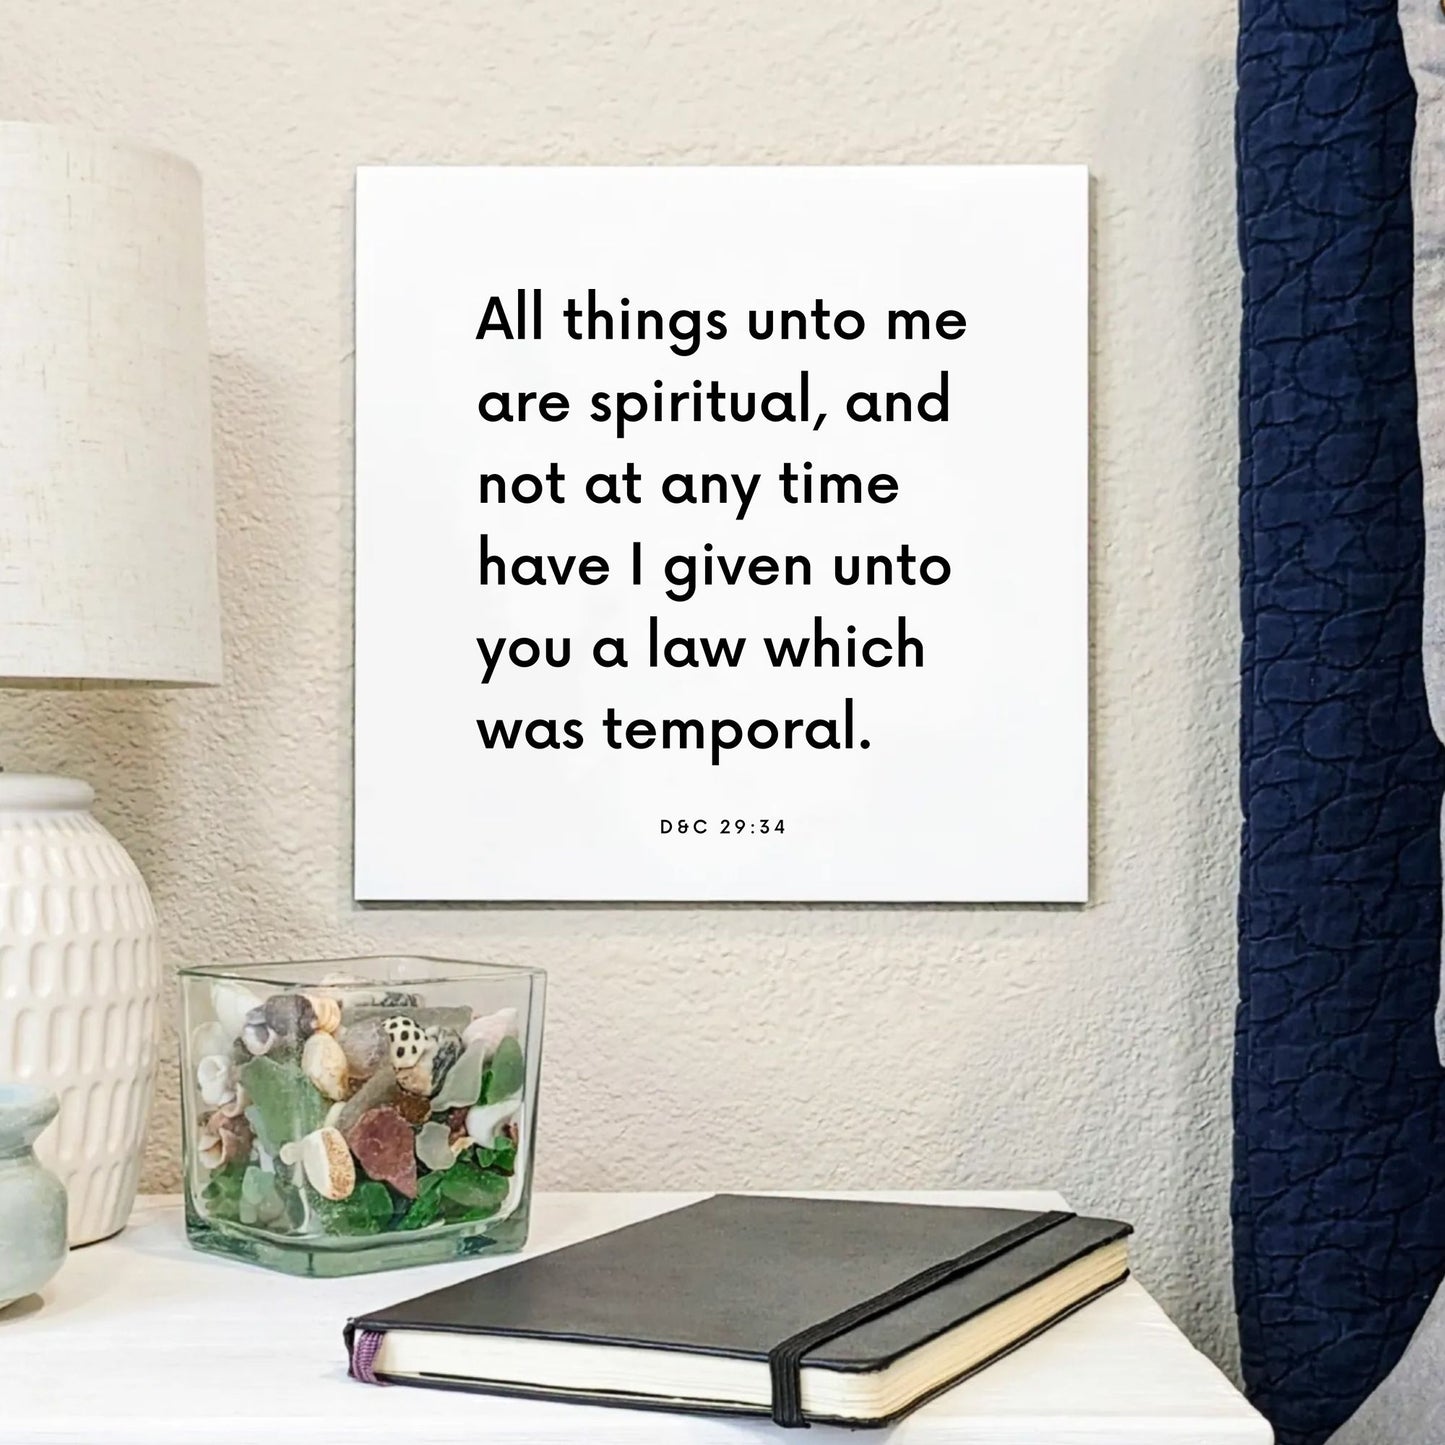 Bedside mouting of the scripture tile for D&C 29:34 - "All things unto me are spiritual"